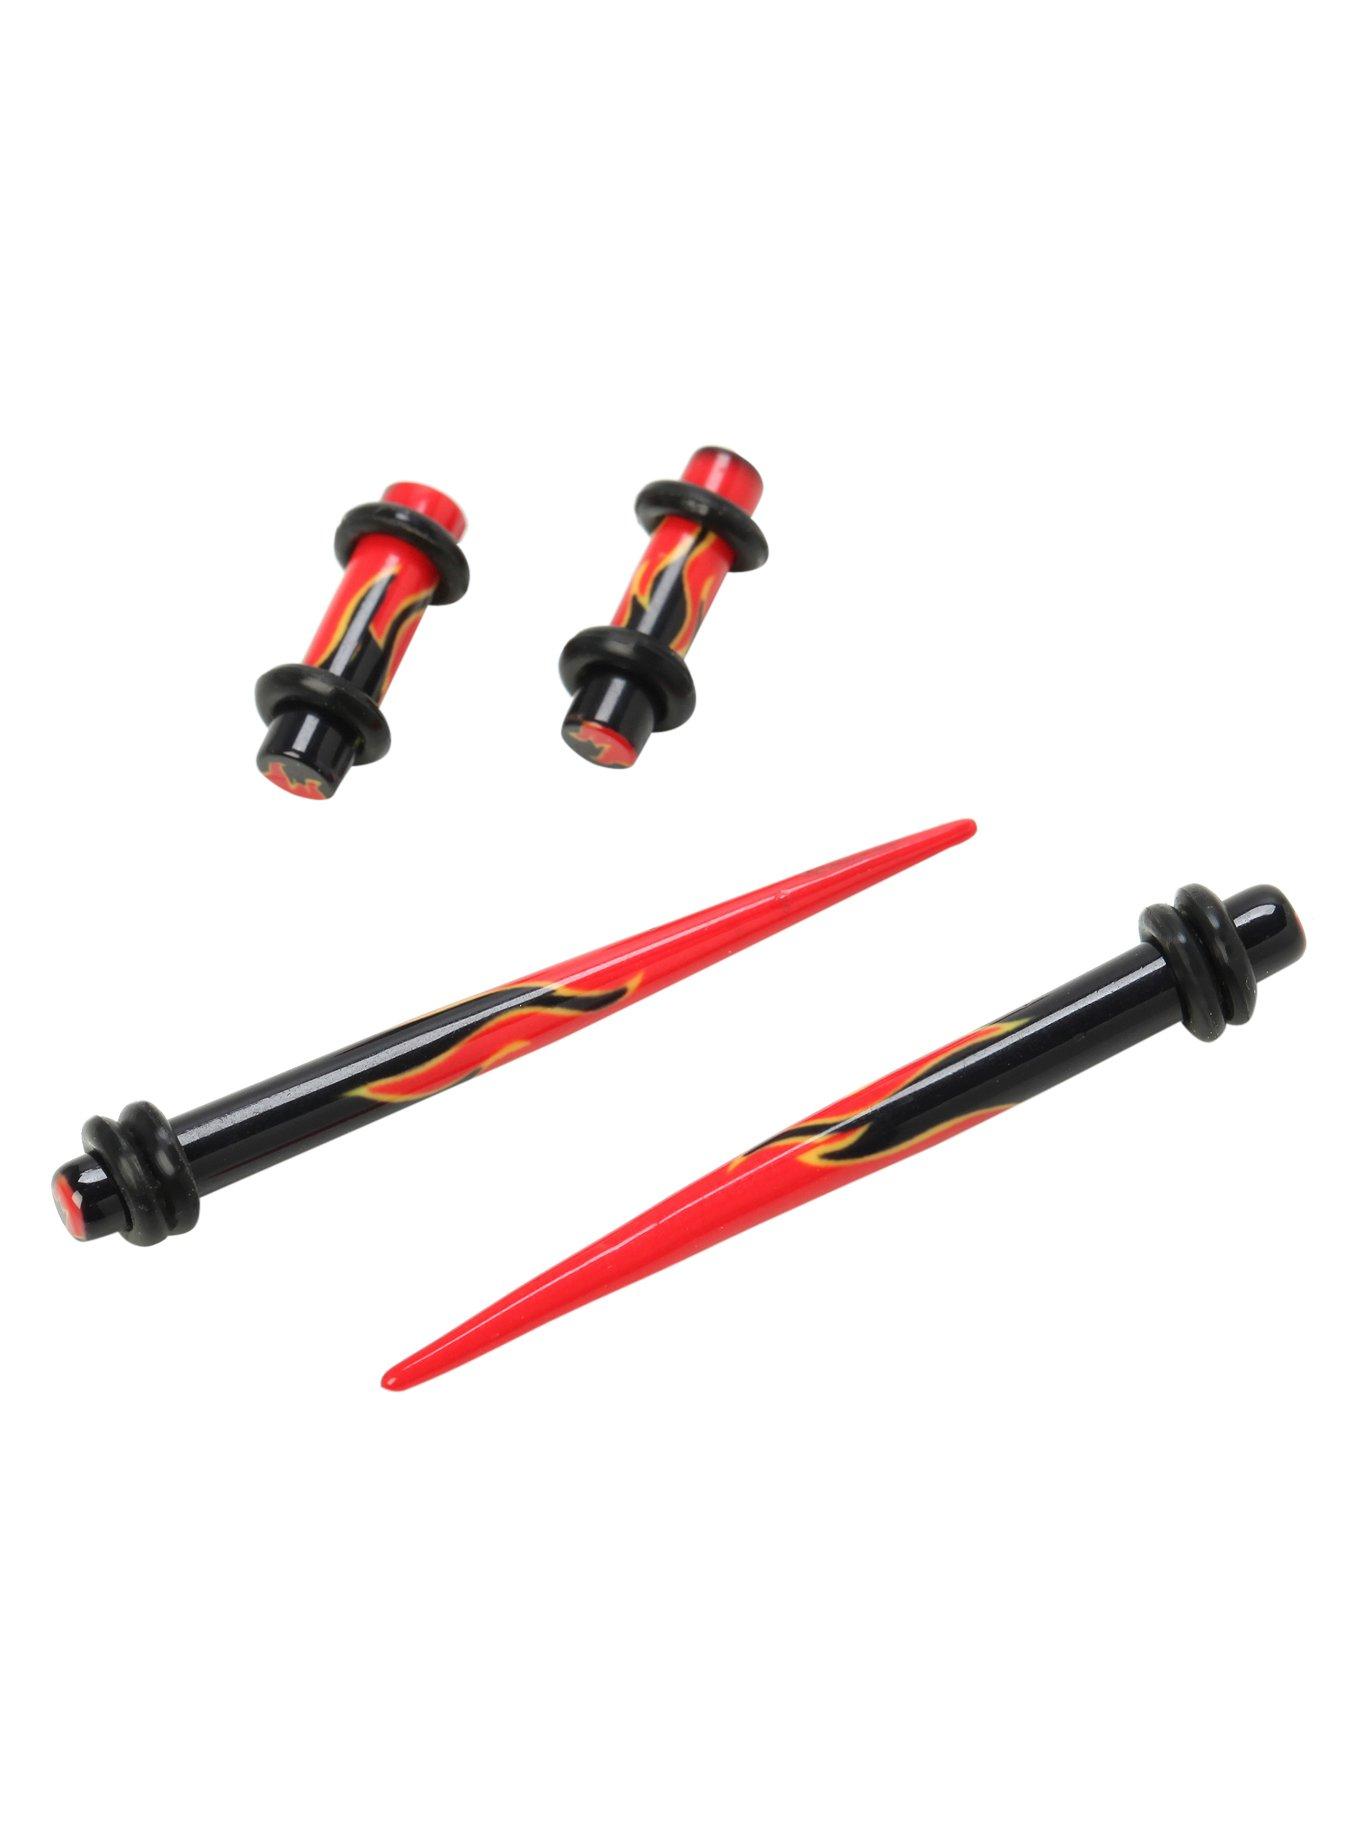 Acrylic Black & Red Flame Micro Taper And Plug 4 Pack, MULTI, hi-res